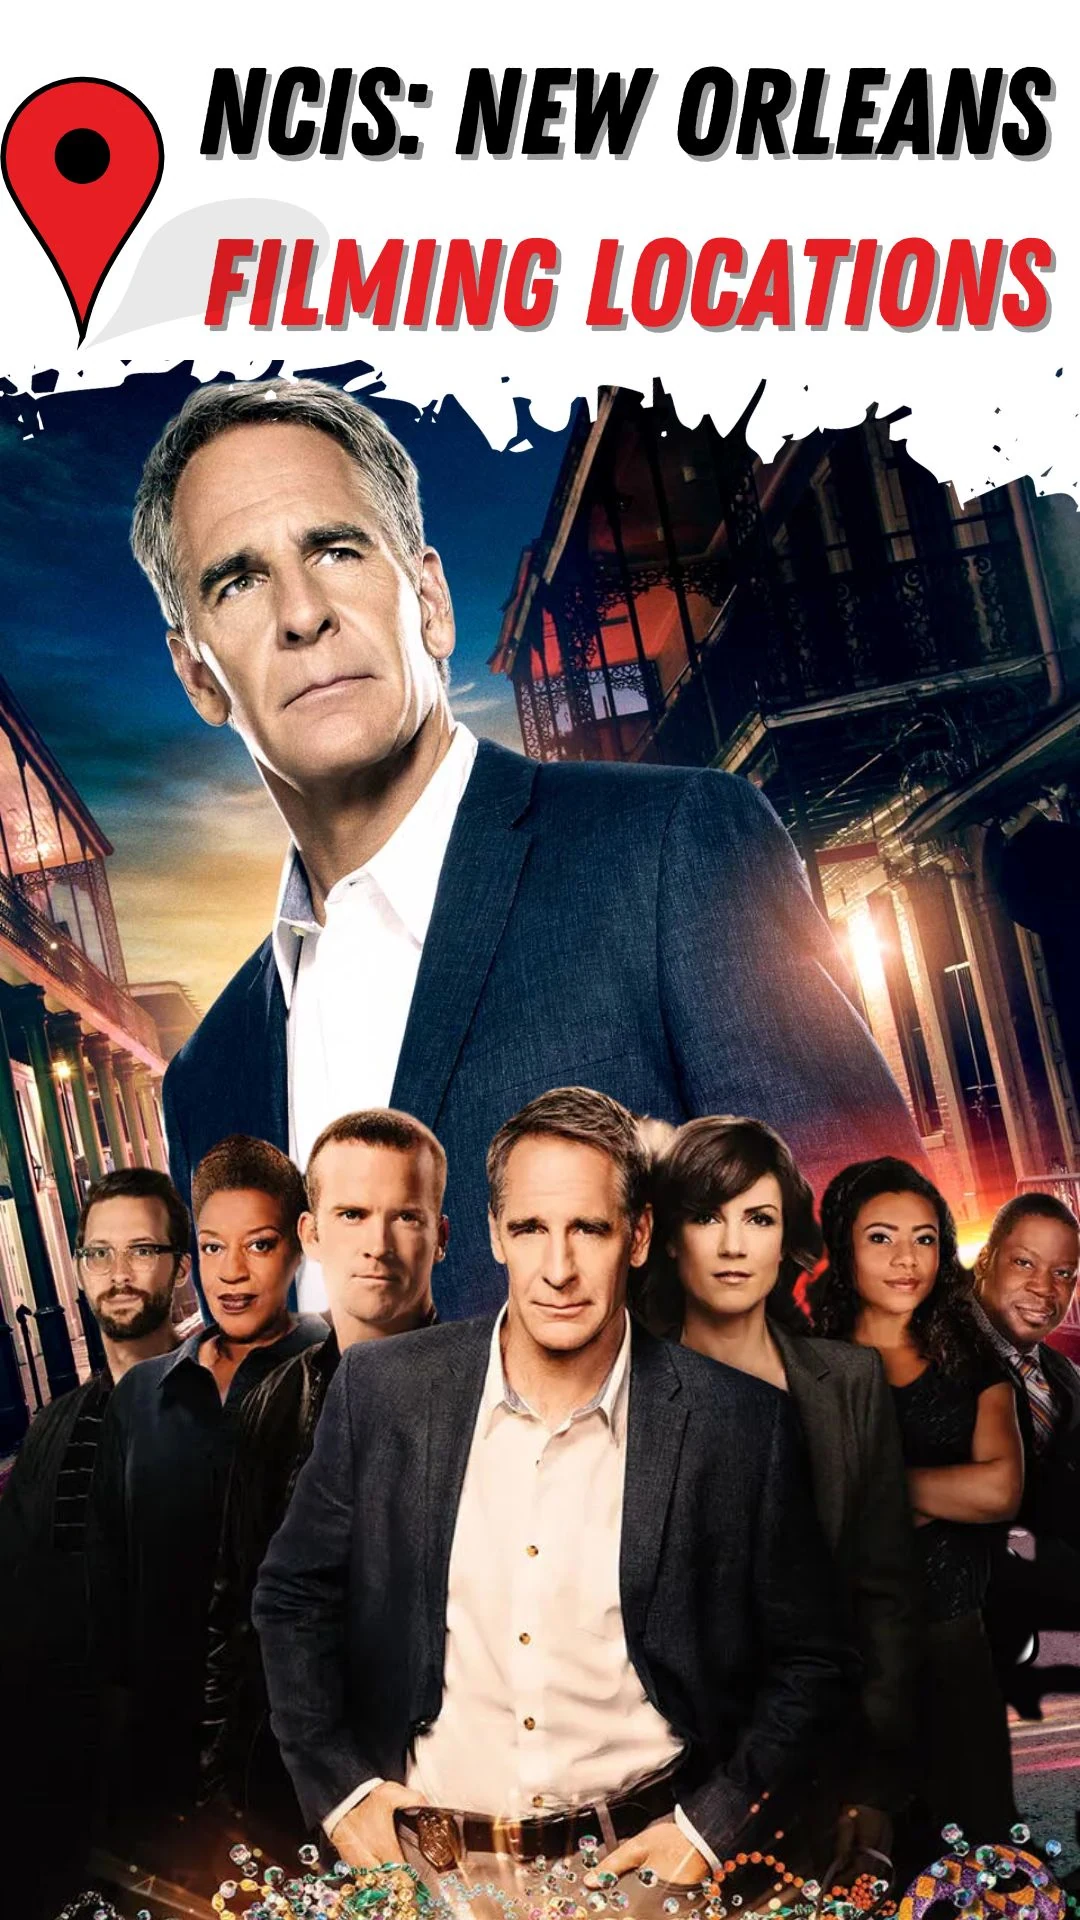 NCIS New Orleans Filming Locations